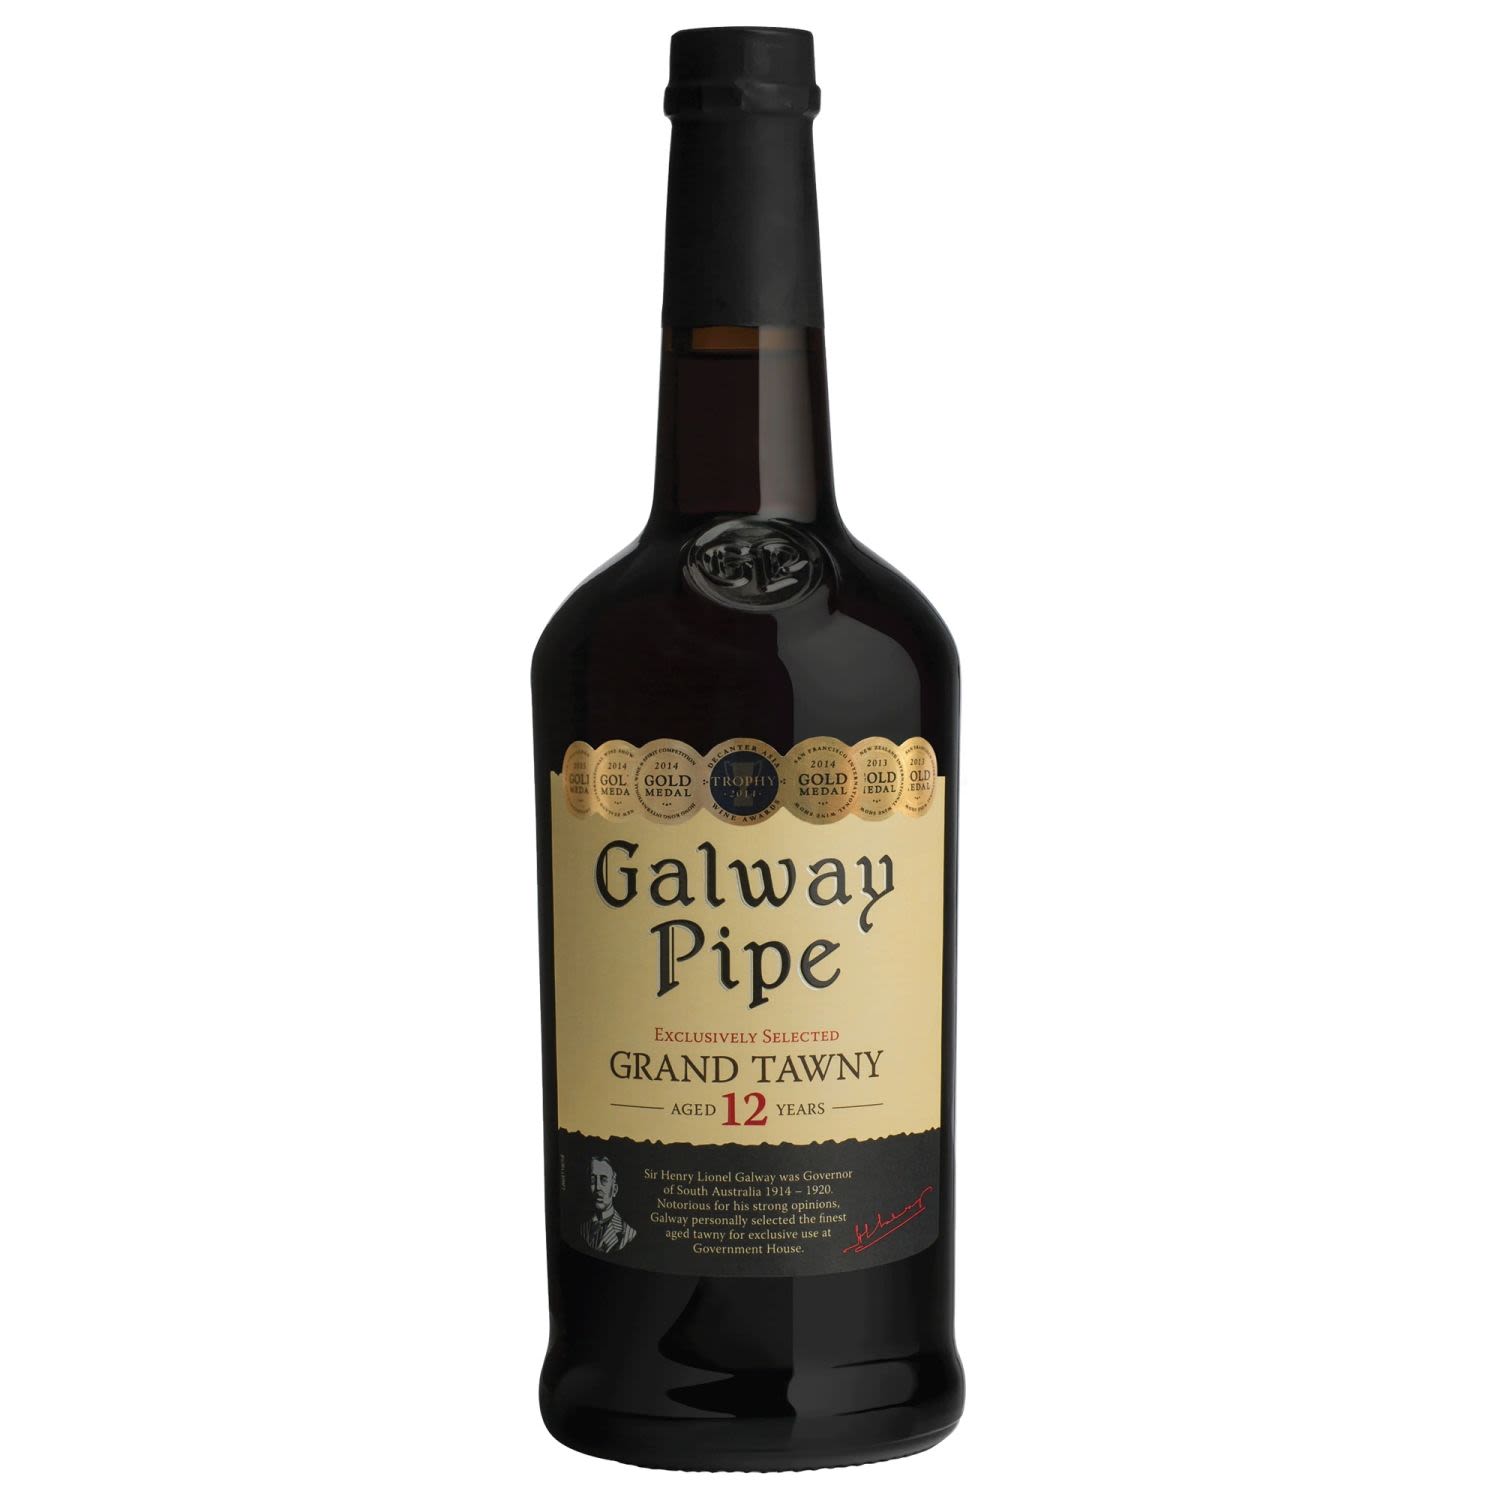 Galway Pipe 12 Year Old Grand Tawny 750mL Bottle